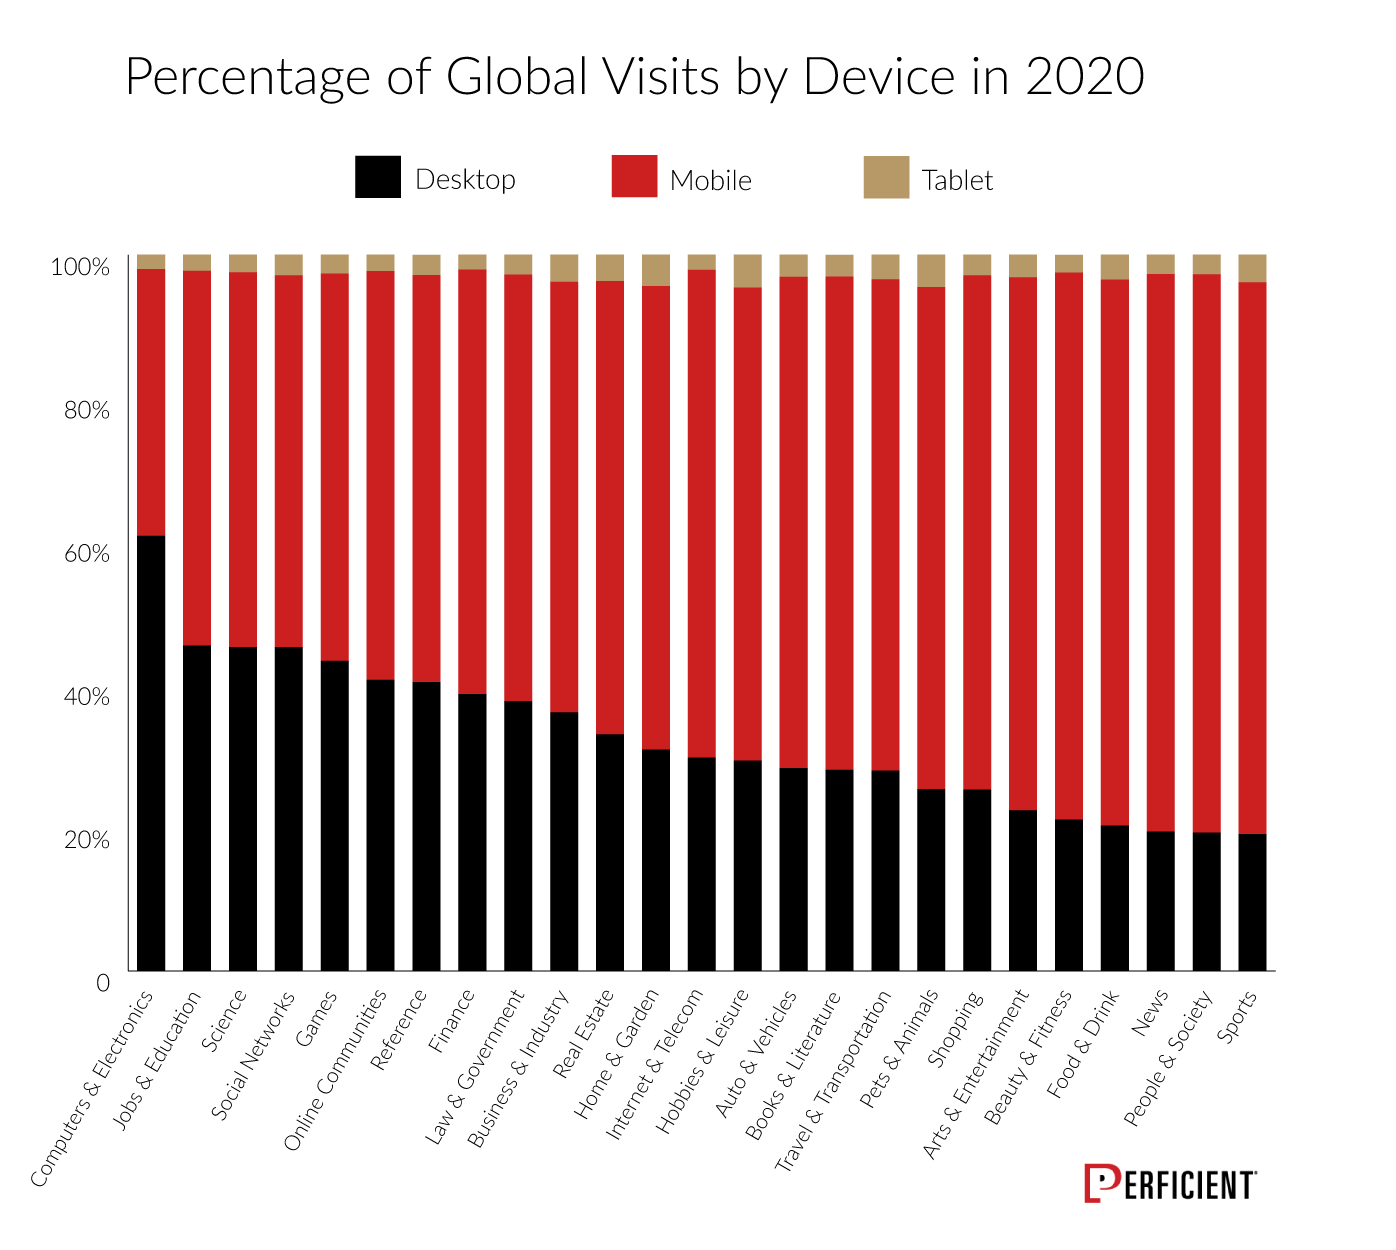 Global Visits In Percentage By Industry for Desktop, Mobile, and Tablet In 2020